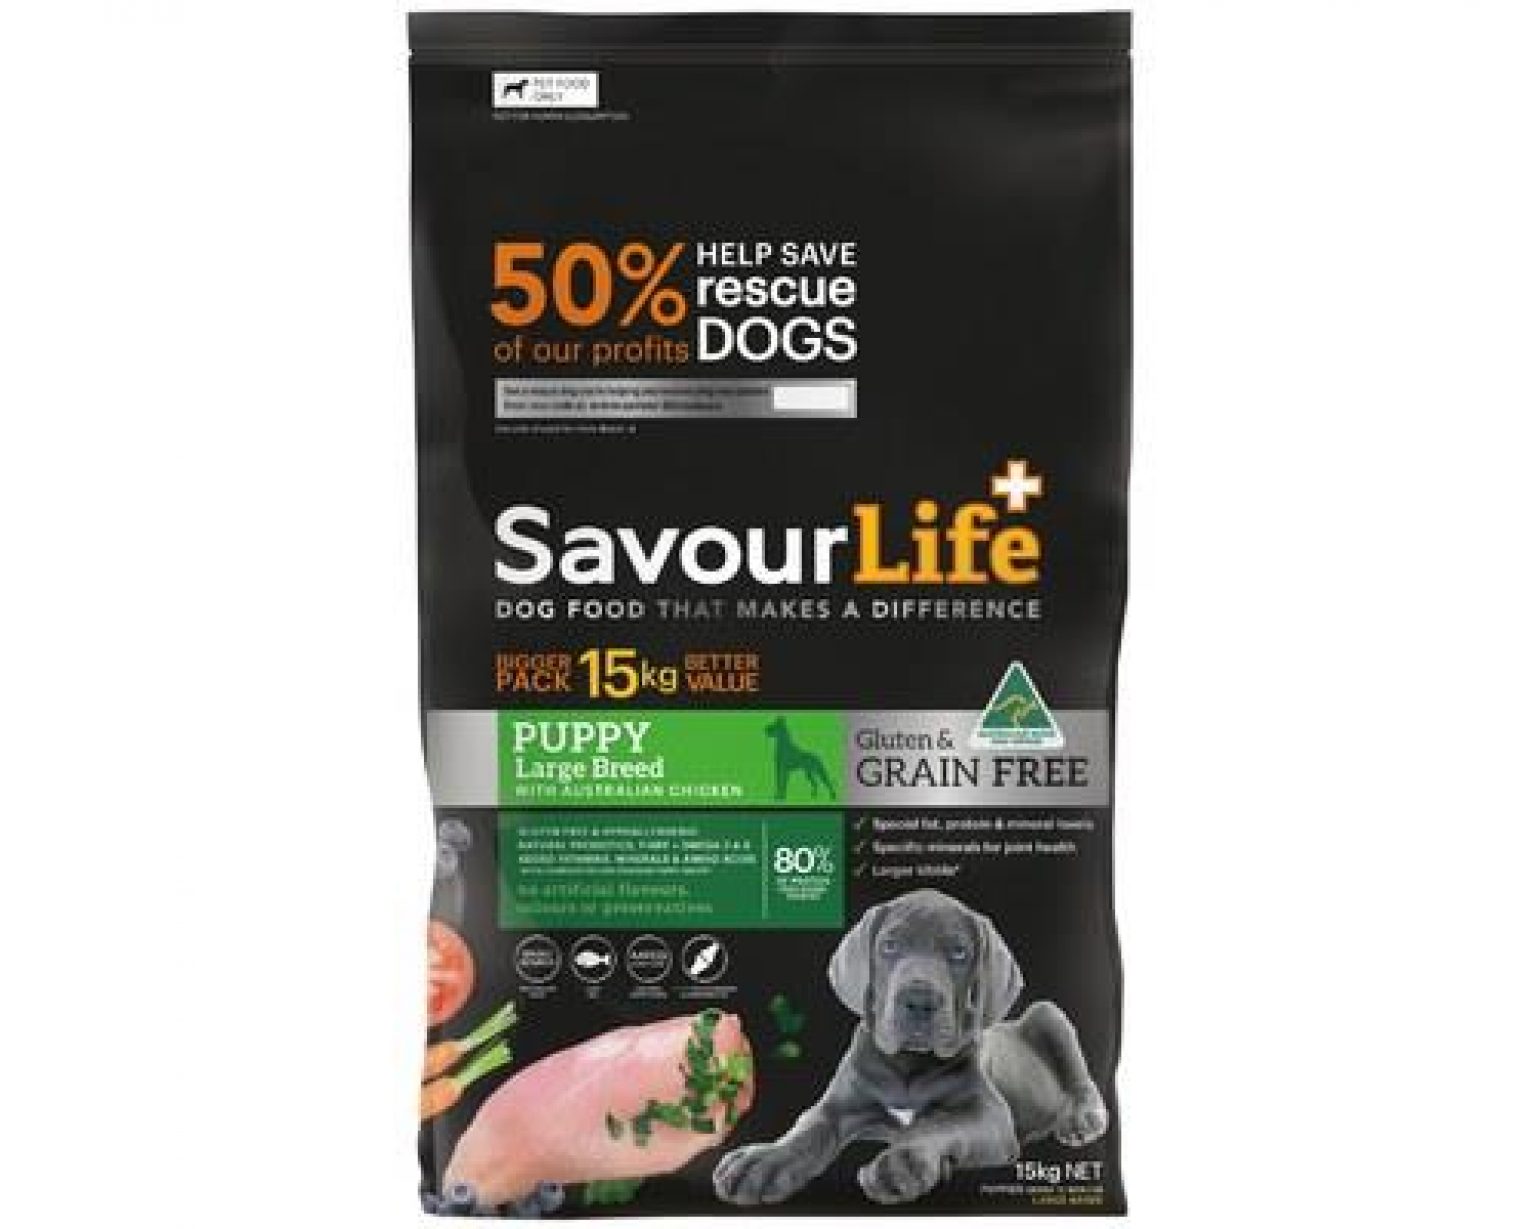 Savourlife Grain Free Puppy Large Breed Chicken 15kg Pet Food Reviews